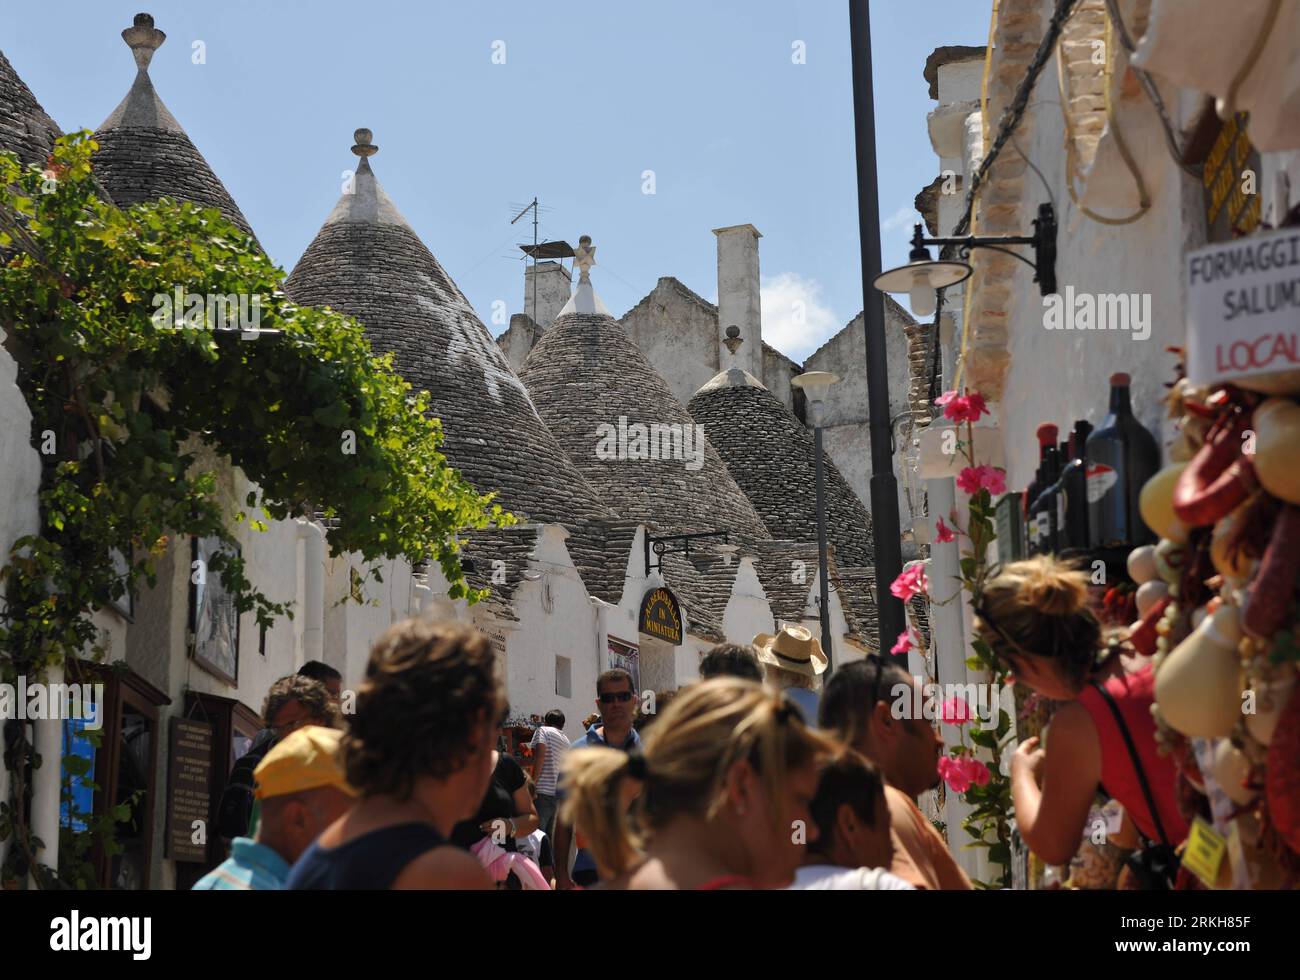 Bildnummer: 55711011  Datum: 10.08.2011  Copyright: imago/Xinhua (110812) -- ALBEROBELLO, Aug. 12, 2011 (Xinhua) -- Tourists visit the Trulli in Alberobello, southern Italy, Aug. 10, 2011. Alberobello, the city of drystone dwellings known as trulli, is an exceptional example of vernacular architecture. The trulli are made of roughly worked limestone boulders collected from neighbouring fields. Characteristically, they feature pyramidal, domed or conical roofs built up of corbelled limestone slabs. UNESCO inscribed the Trulli of Alberobello in the World Heritage List in 1996. (Xinhua/Wang Qingq Stock Photo